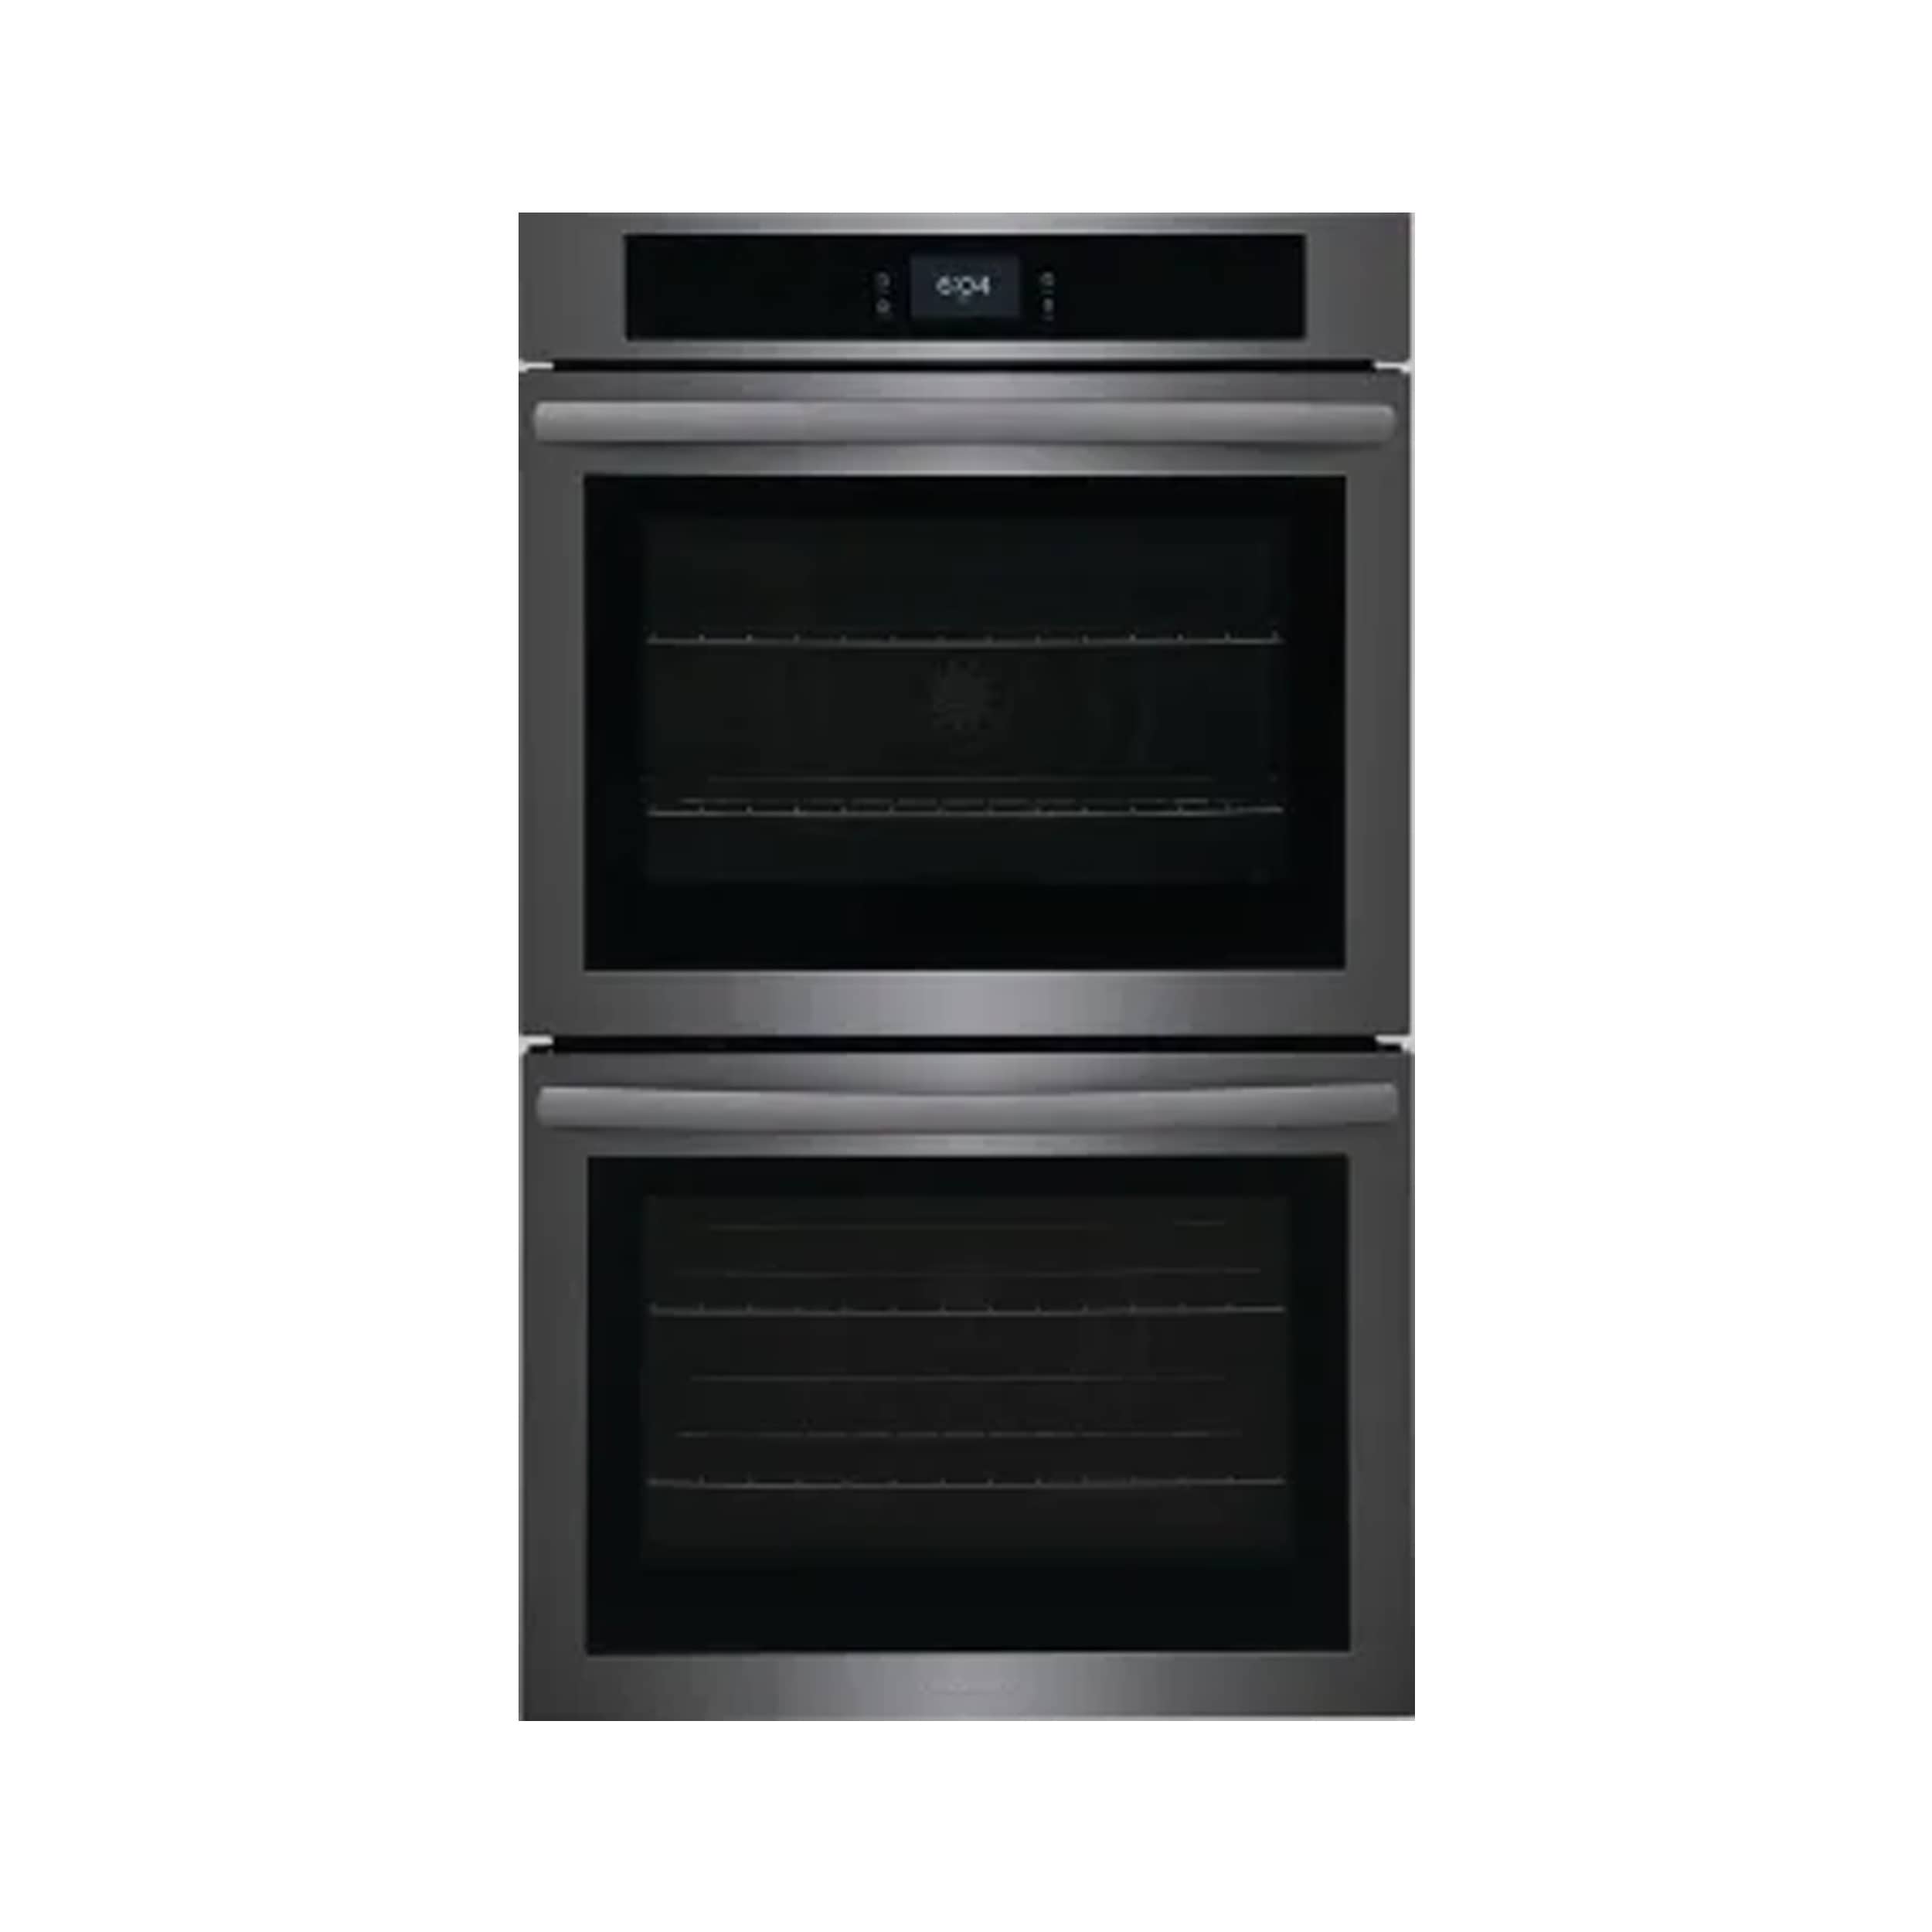 Frigidaire 30IN DOUBLE ELECTRIC WALL OVEN WITH FAN CONVECTION